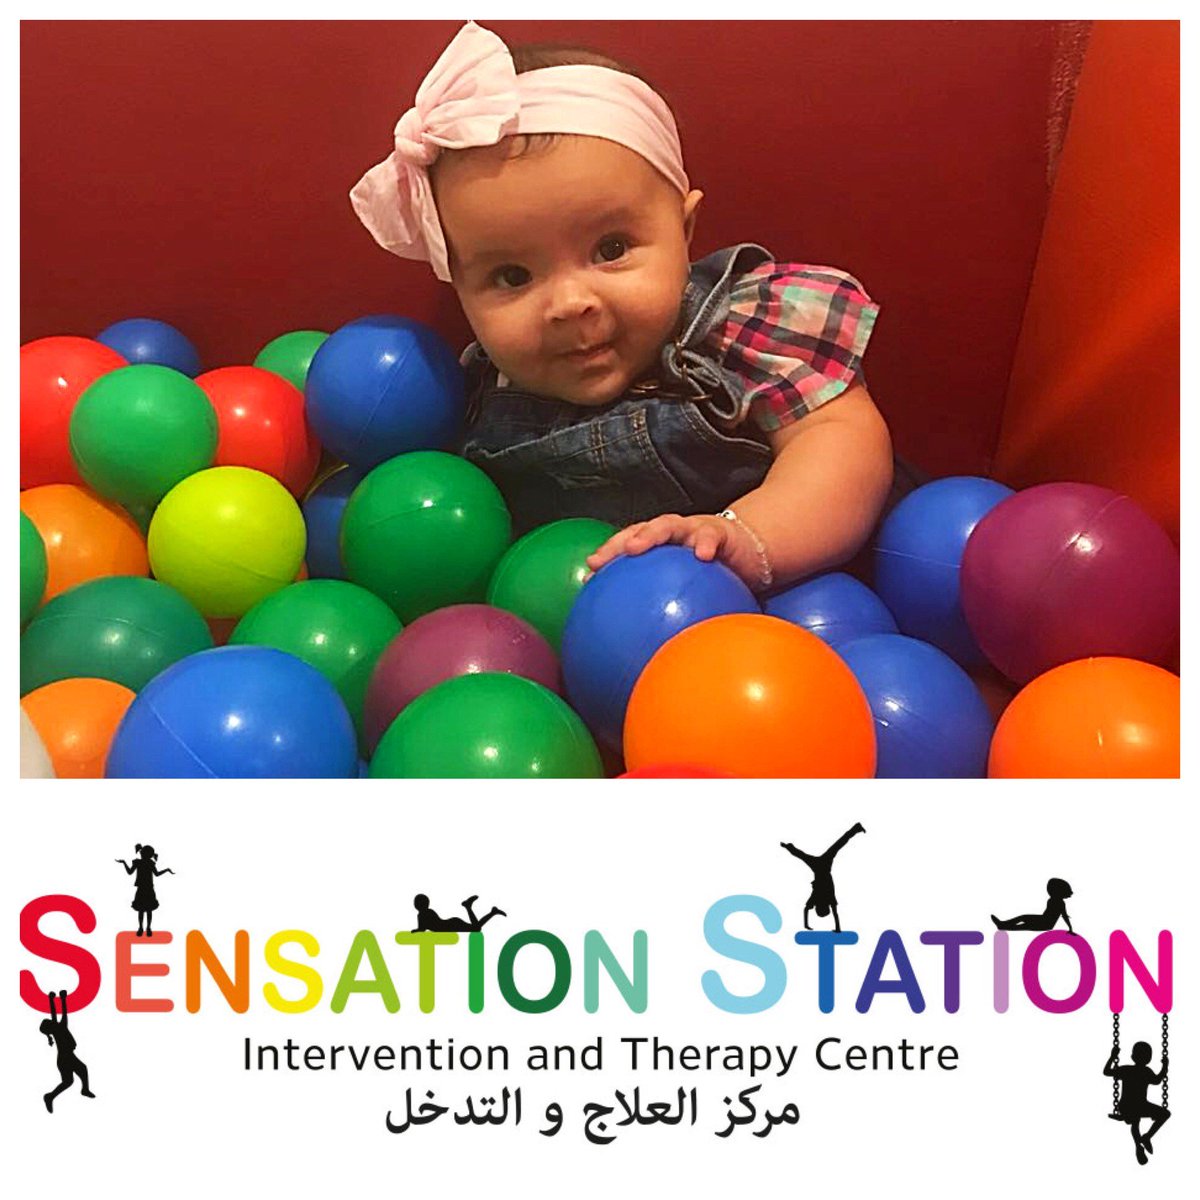 WHY WE USE BALL PITS?  Our #OccupationalTherapists use #BallPits because they are #fun & provide a range of #TherapeuticBenefits such as #DeepPressure #ProprioceptiveAwareness #TactilePlay #BodyAwareness #MotorPlanning #VisualStimulation #CoreStrengthening #SensoryMotorSkills #OT